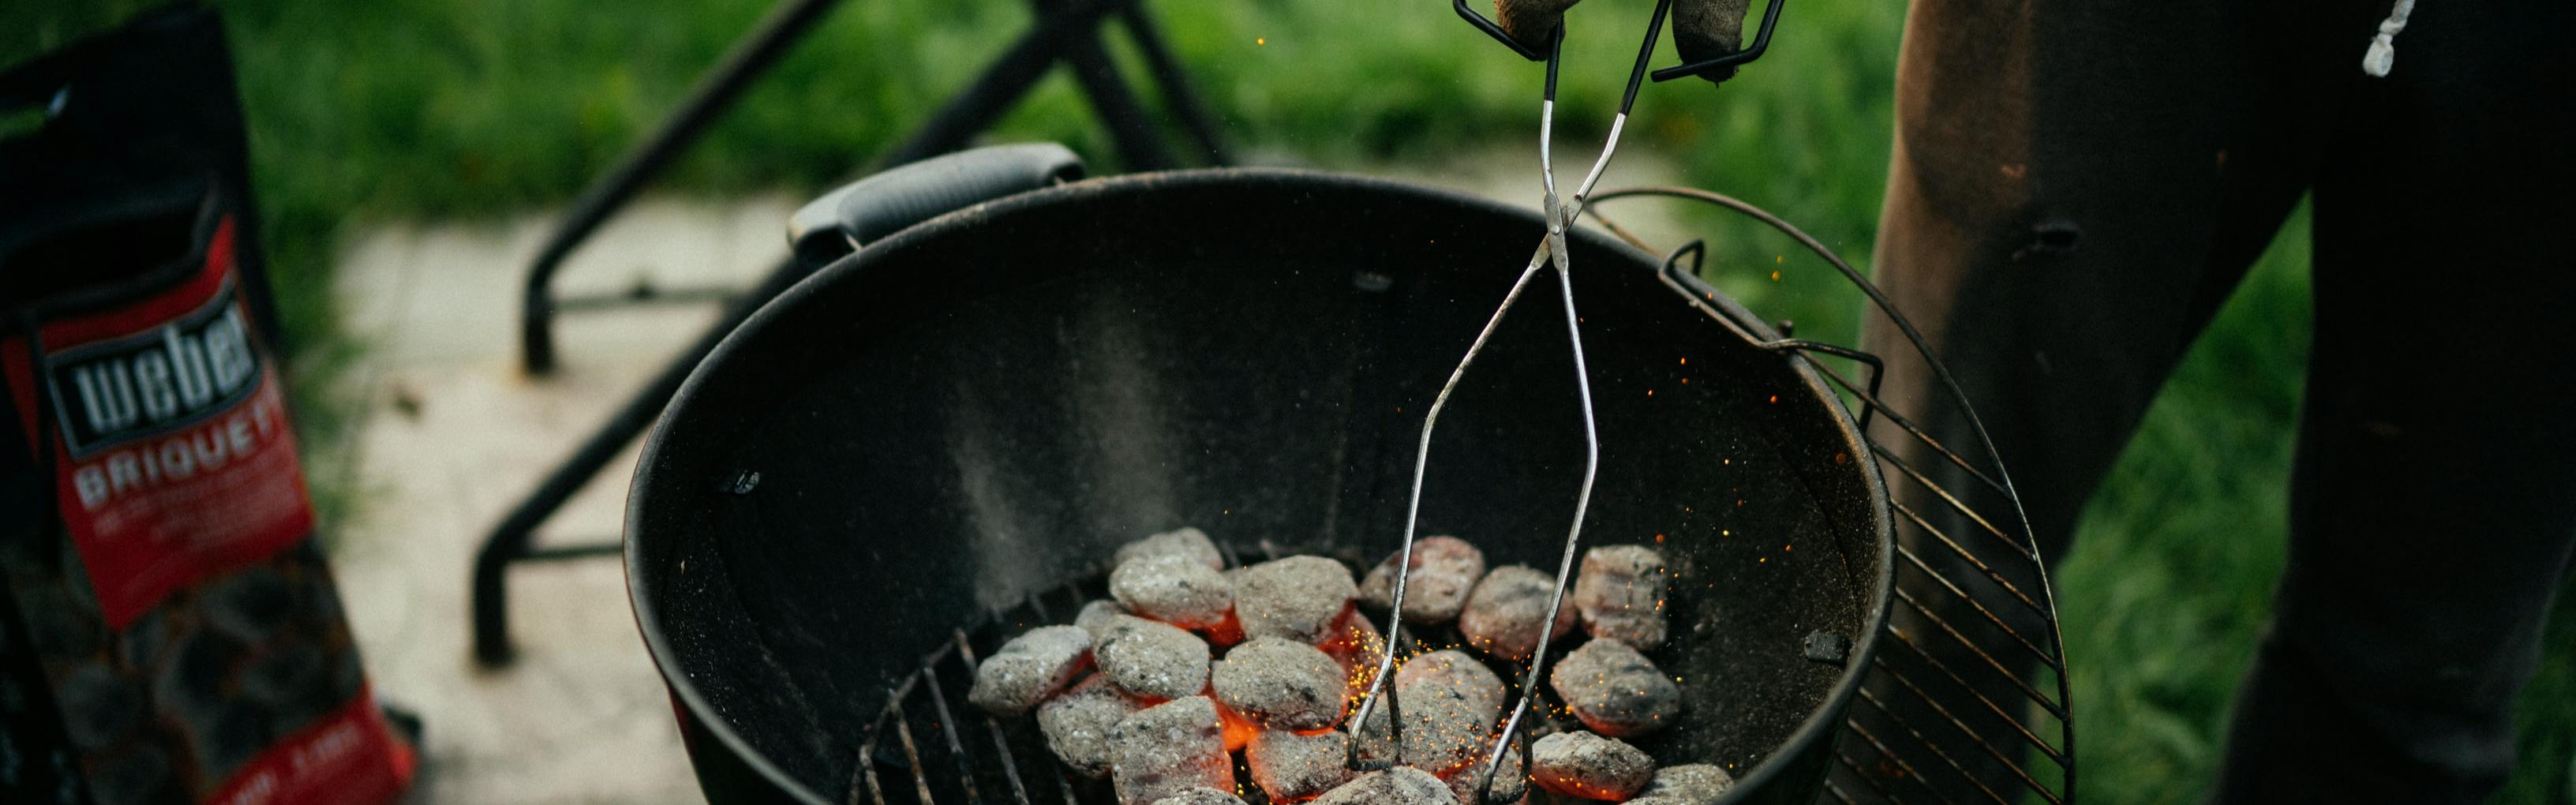 The Ultimate Guide To The Weber 26 Charcoal Grill - Plus Great Accessories  - Dishcrawl